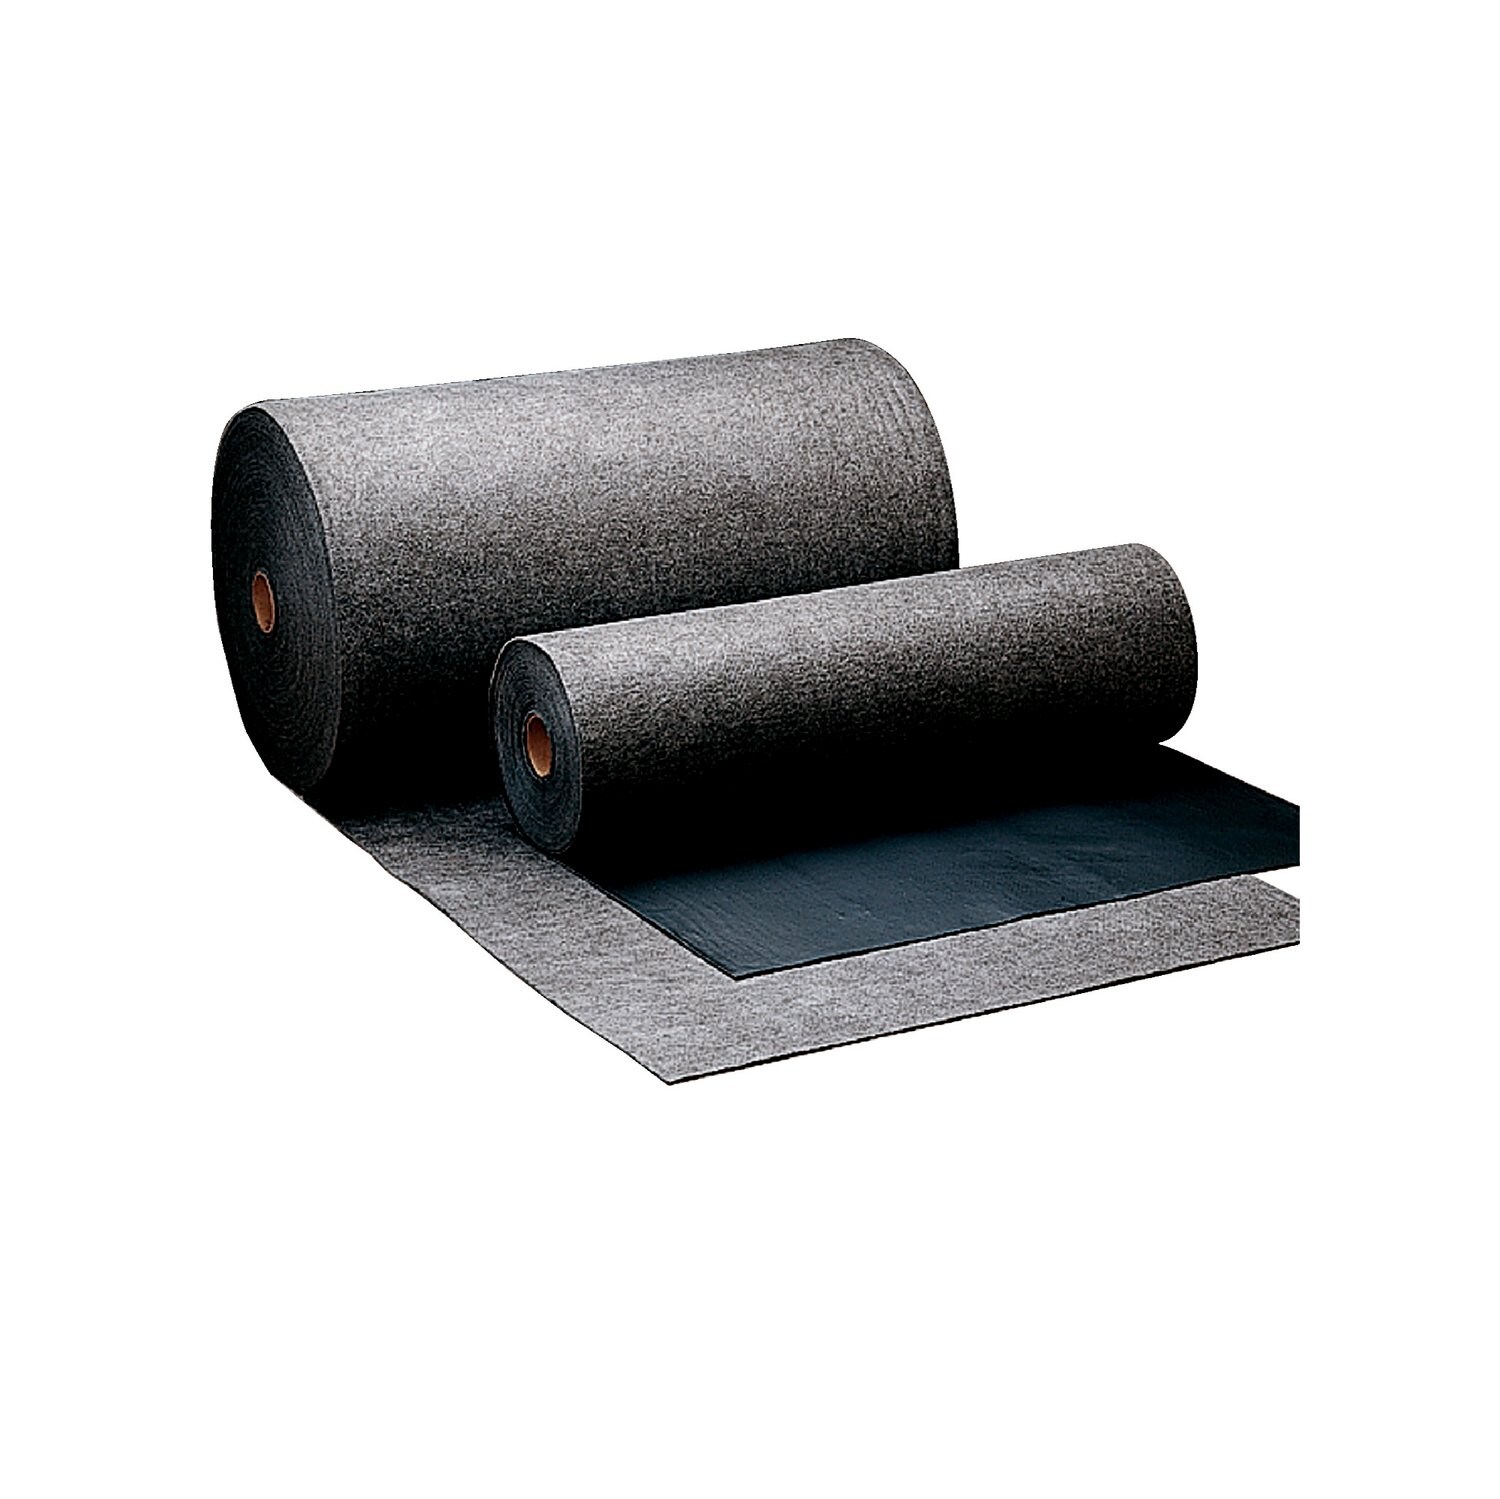 7000001942 - 3M Maintenance Sorbent Rug M-RGC36100E, With Coating, 914 mm x 30 m, 1
Roll/Case